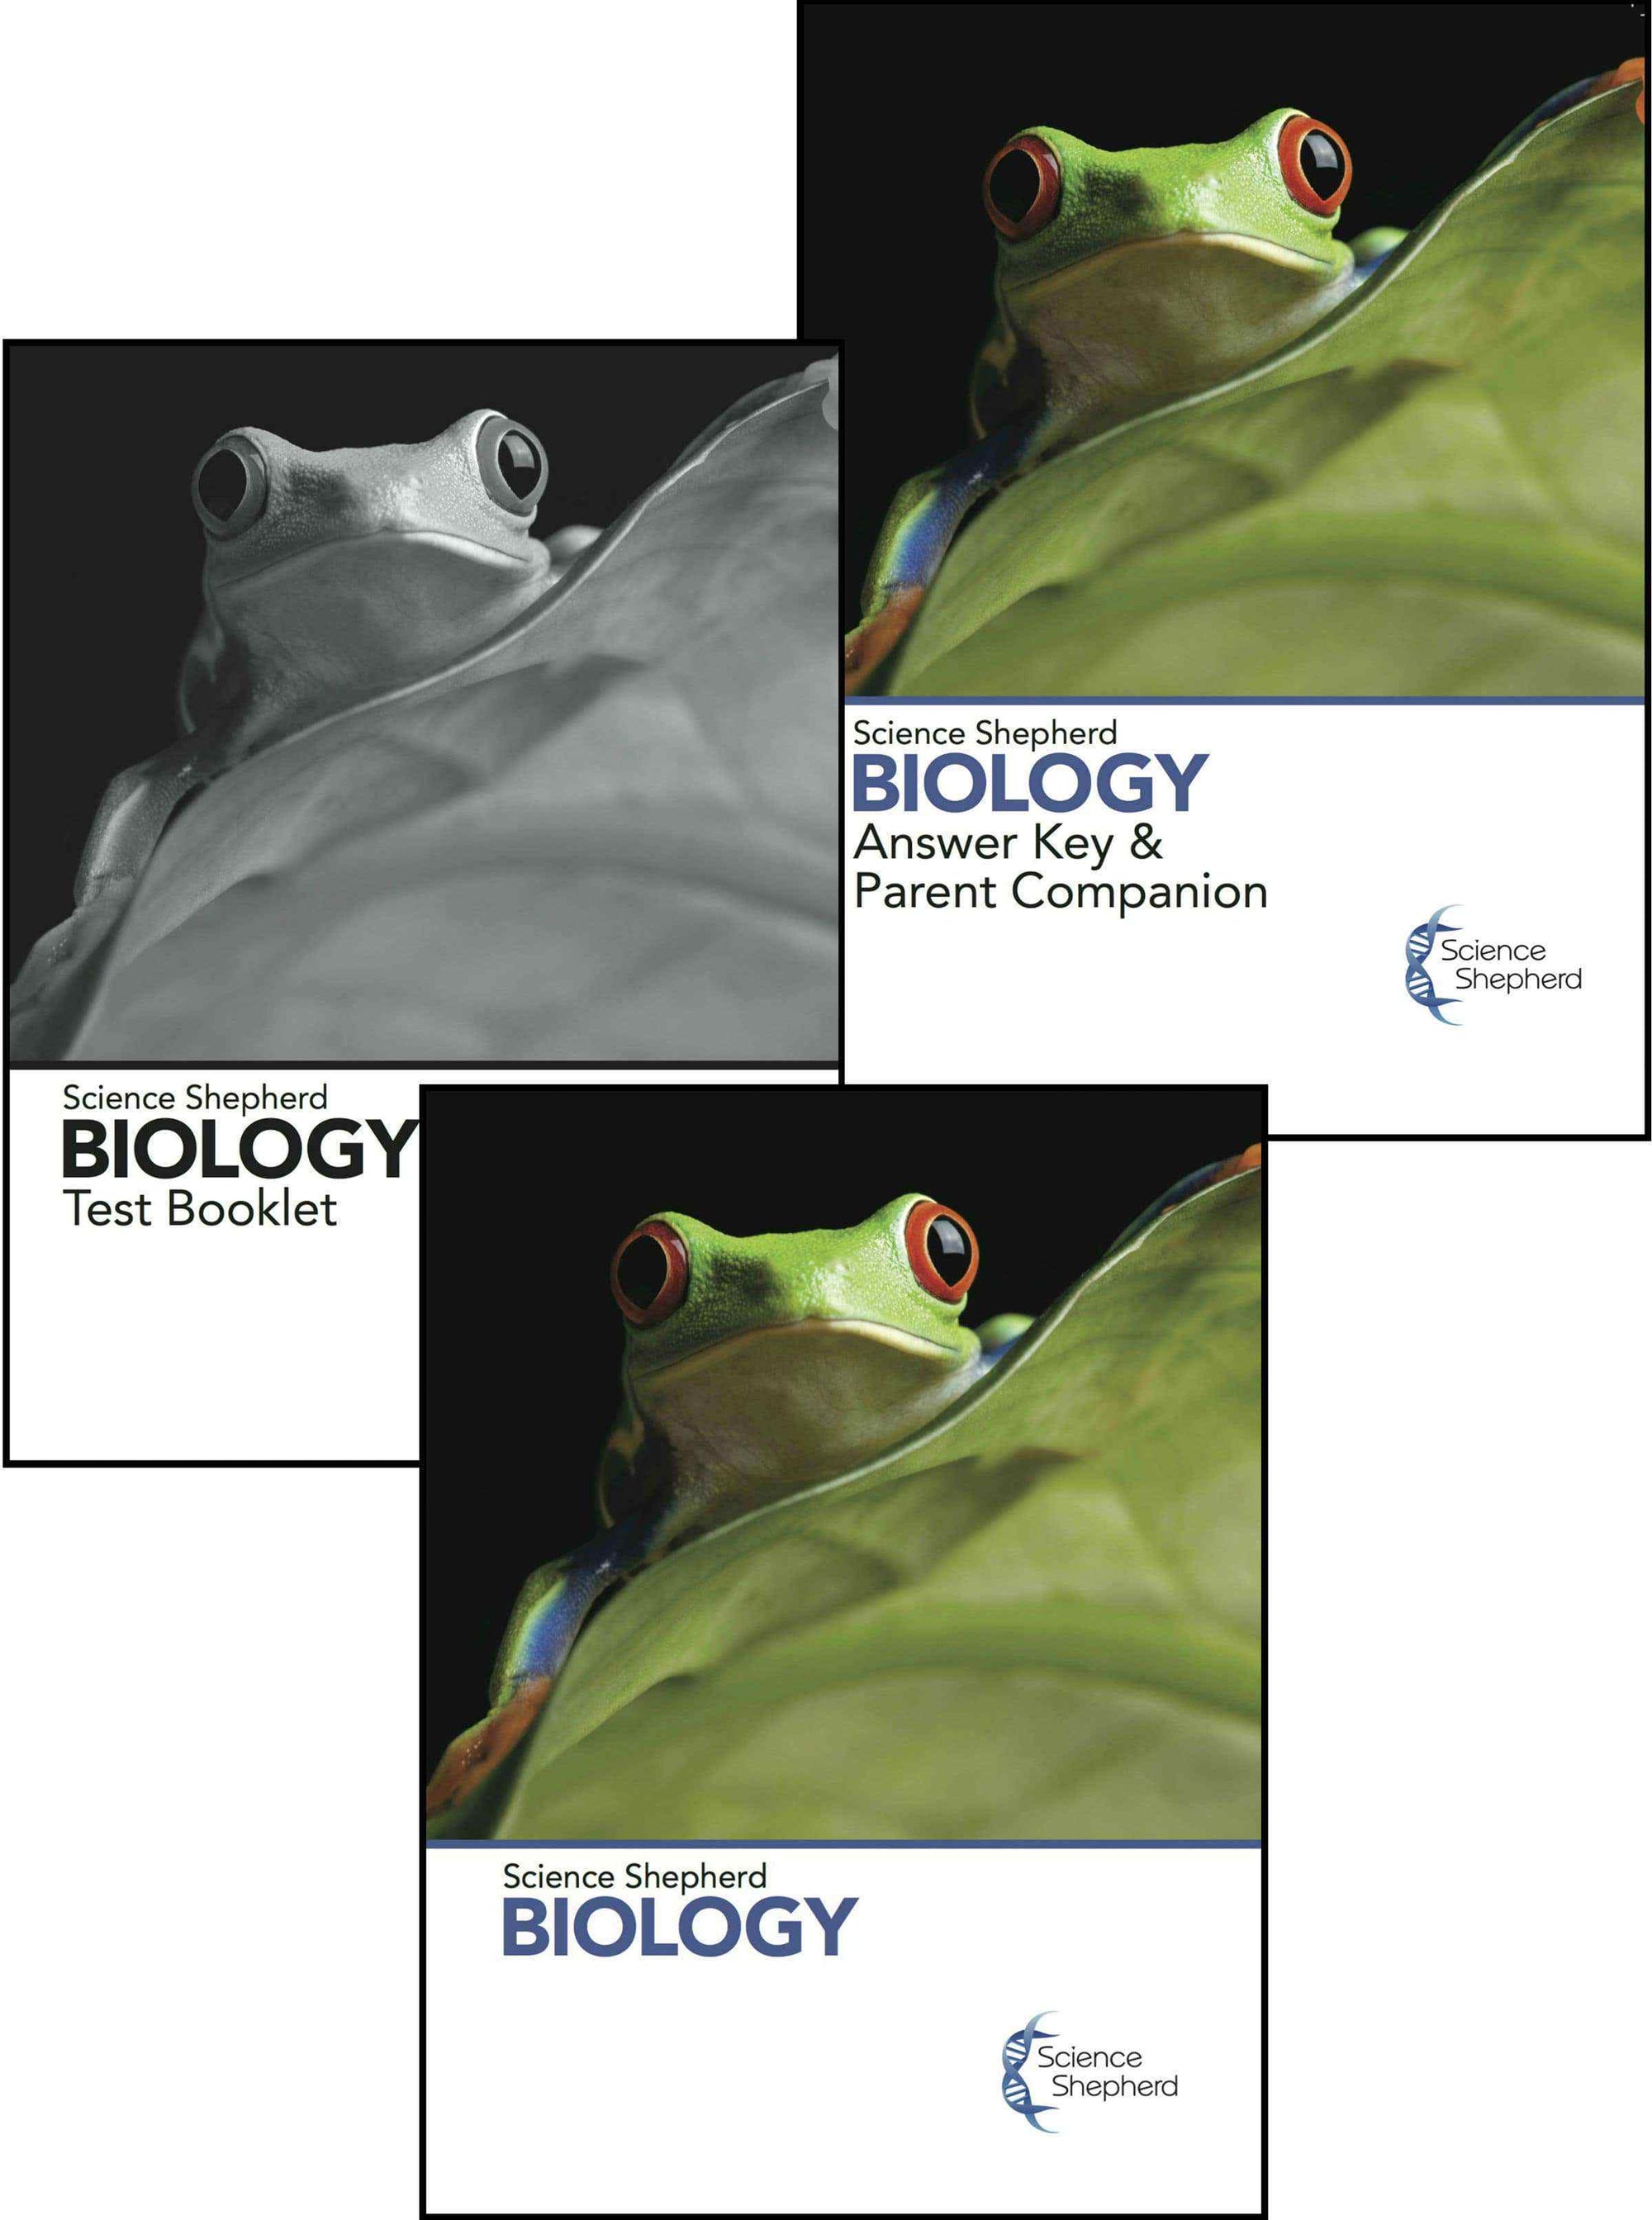 9th grade homeschool biology curriculum 3-Book Set covers of a textbook, parent guide and tests